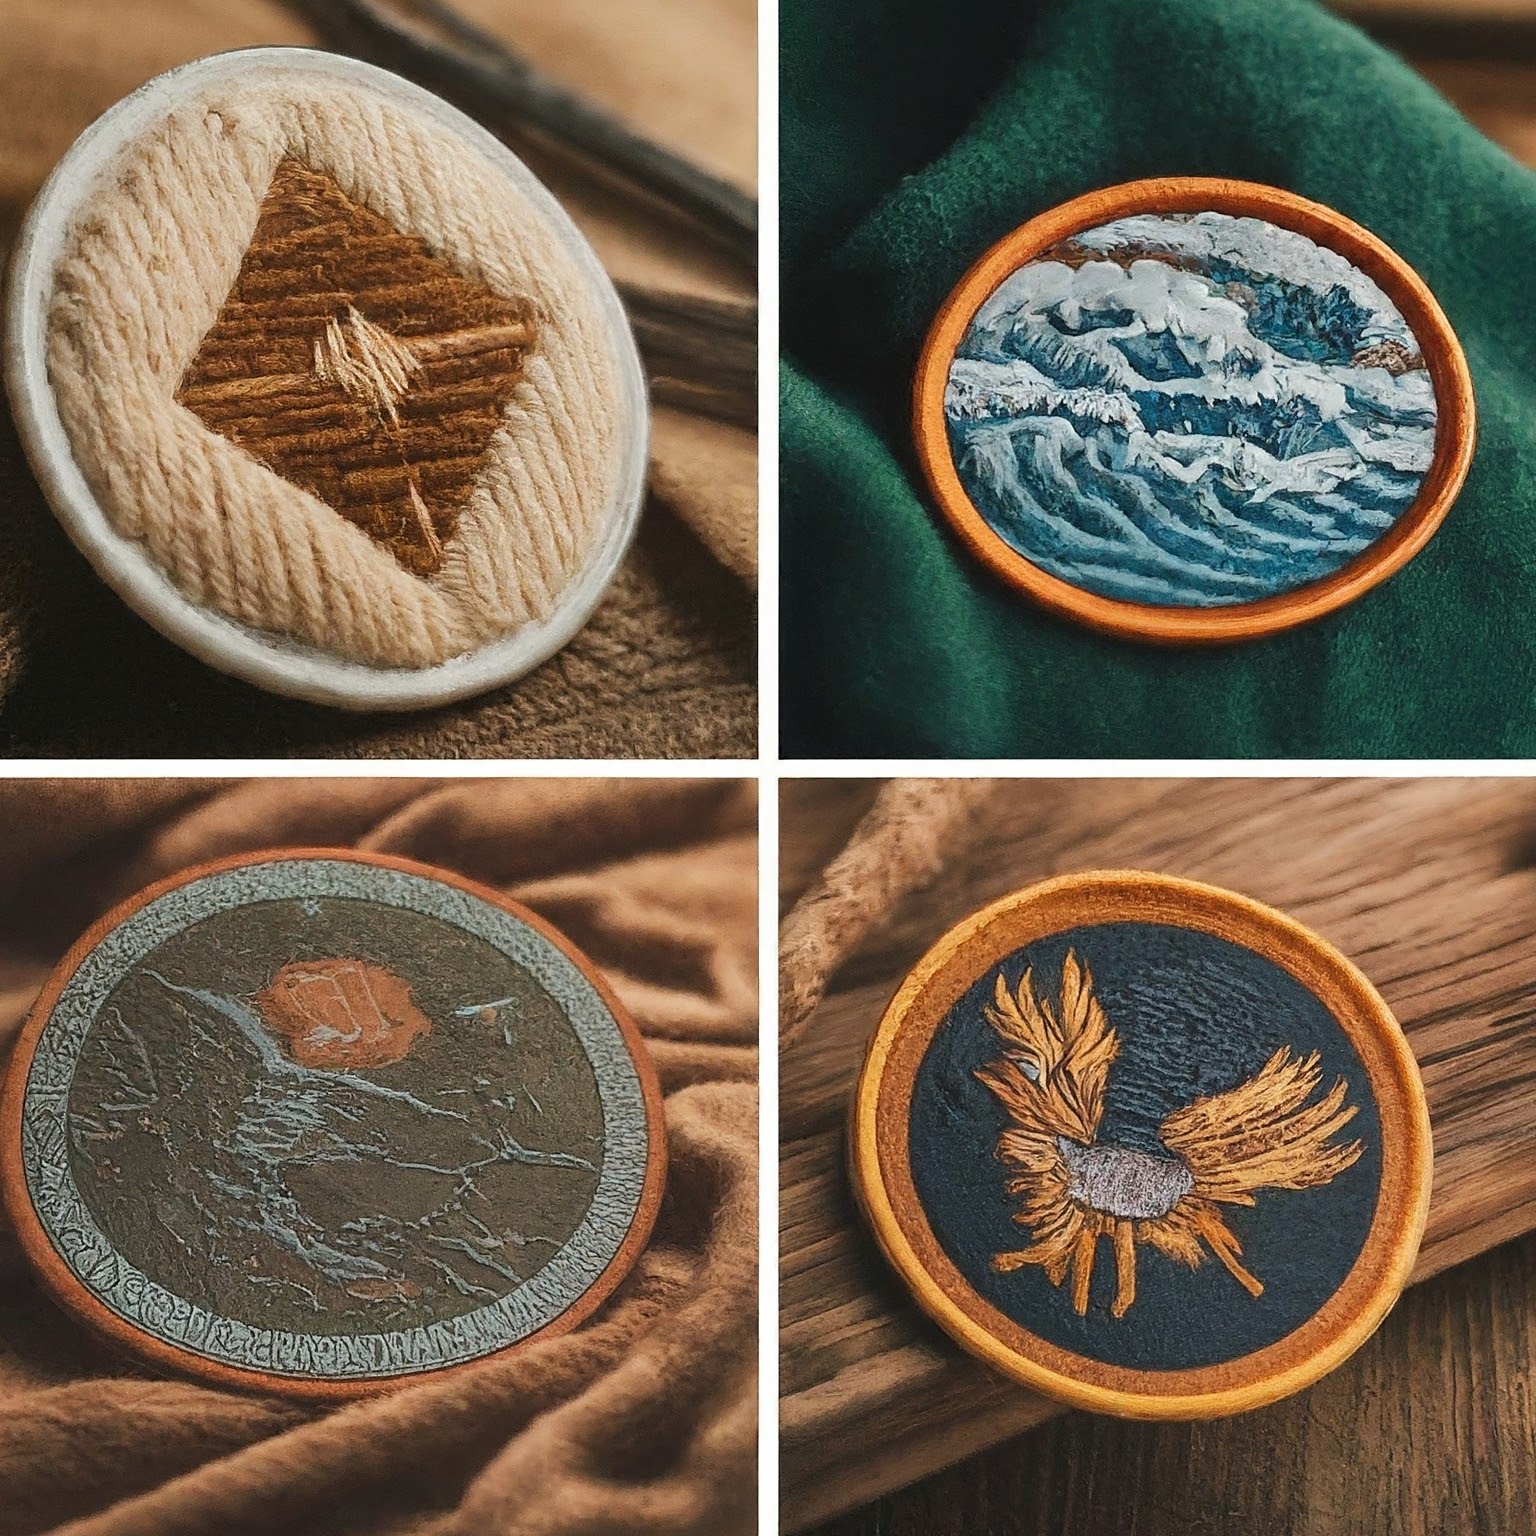 Woven Patches vs Embroidered Patches: A Side-by-Side Comparison